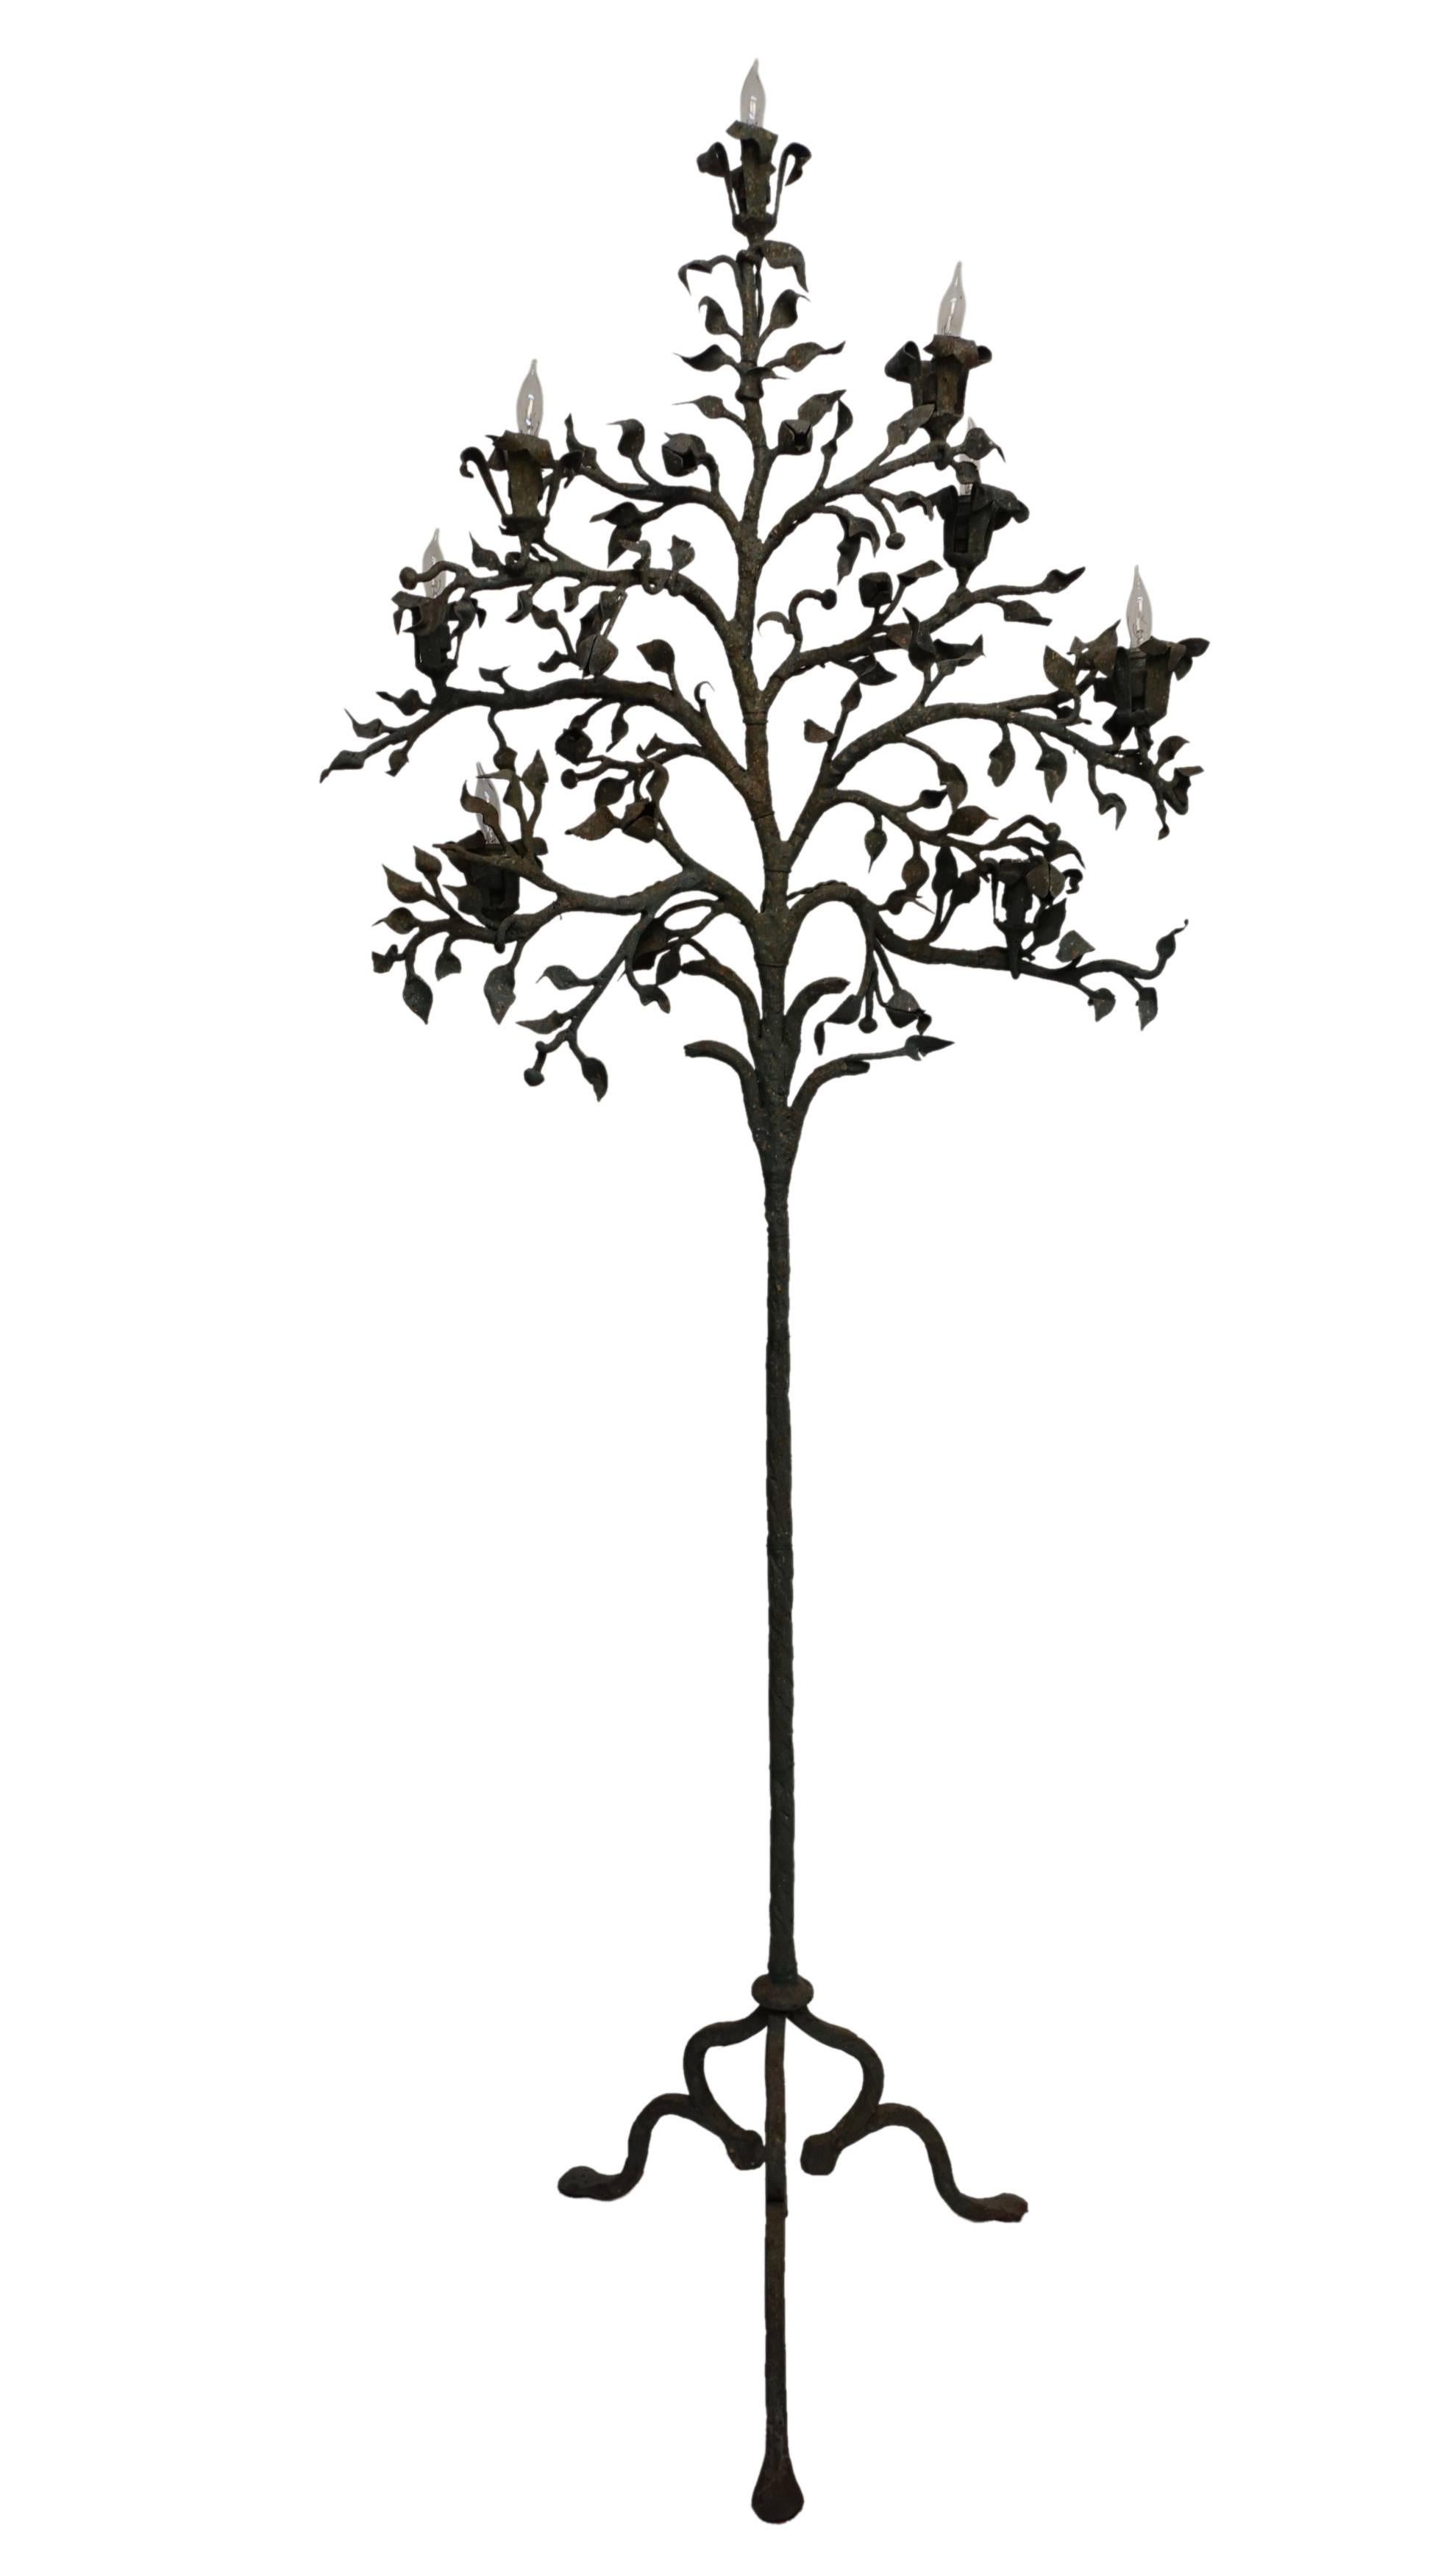 Pair of Wrought Iron Tree Form Torchiere Floor Lamps, Italy, 19th Century 1